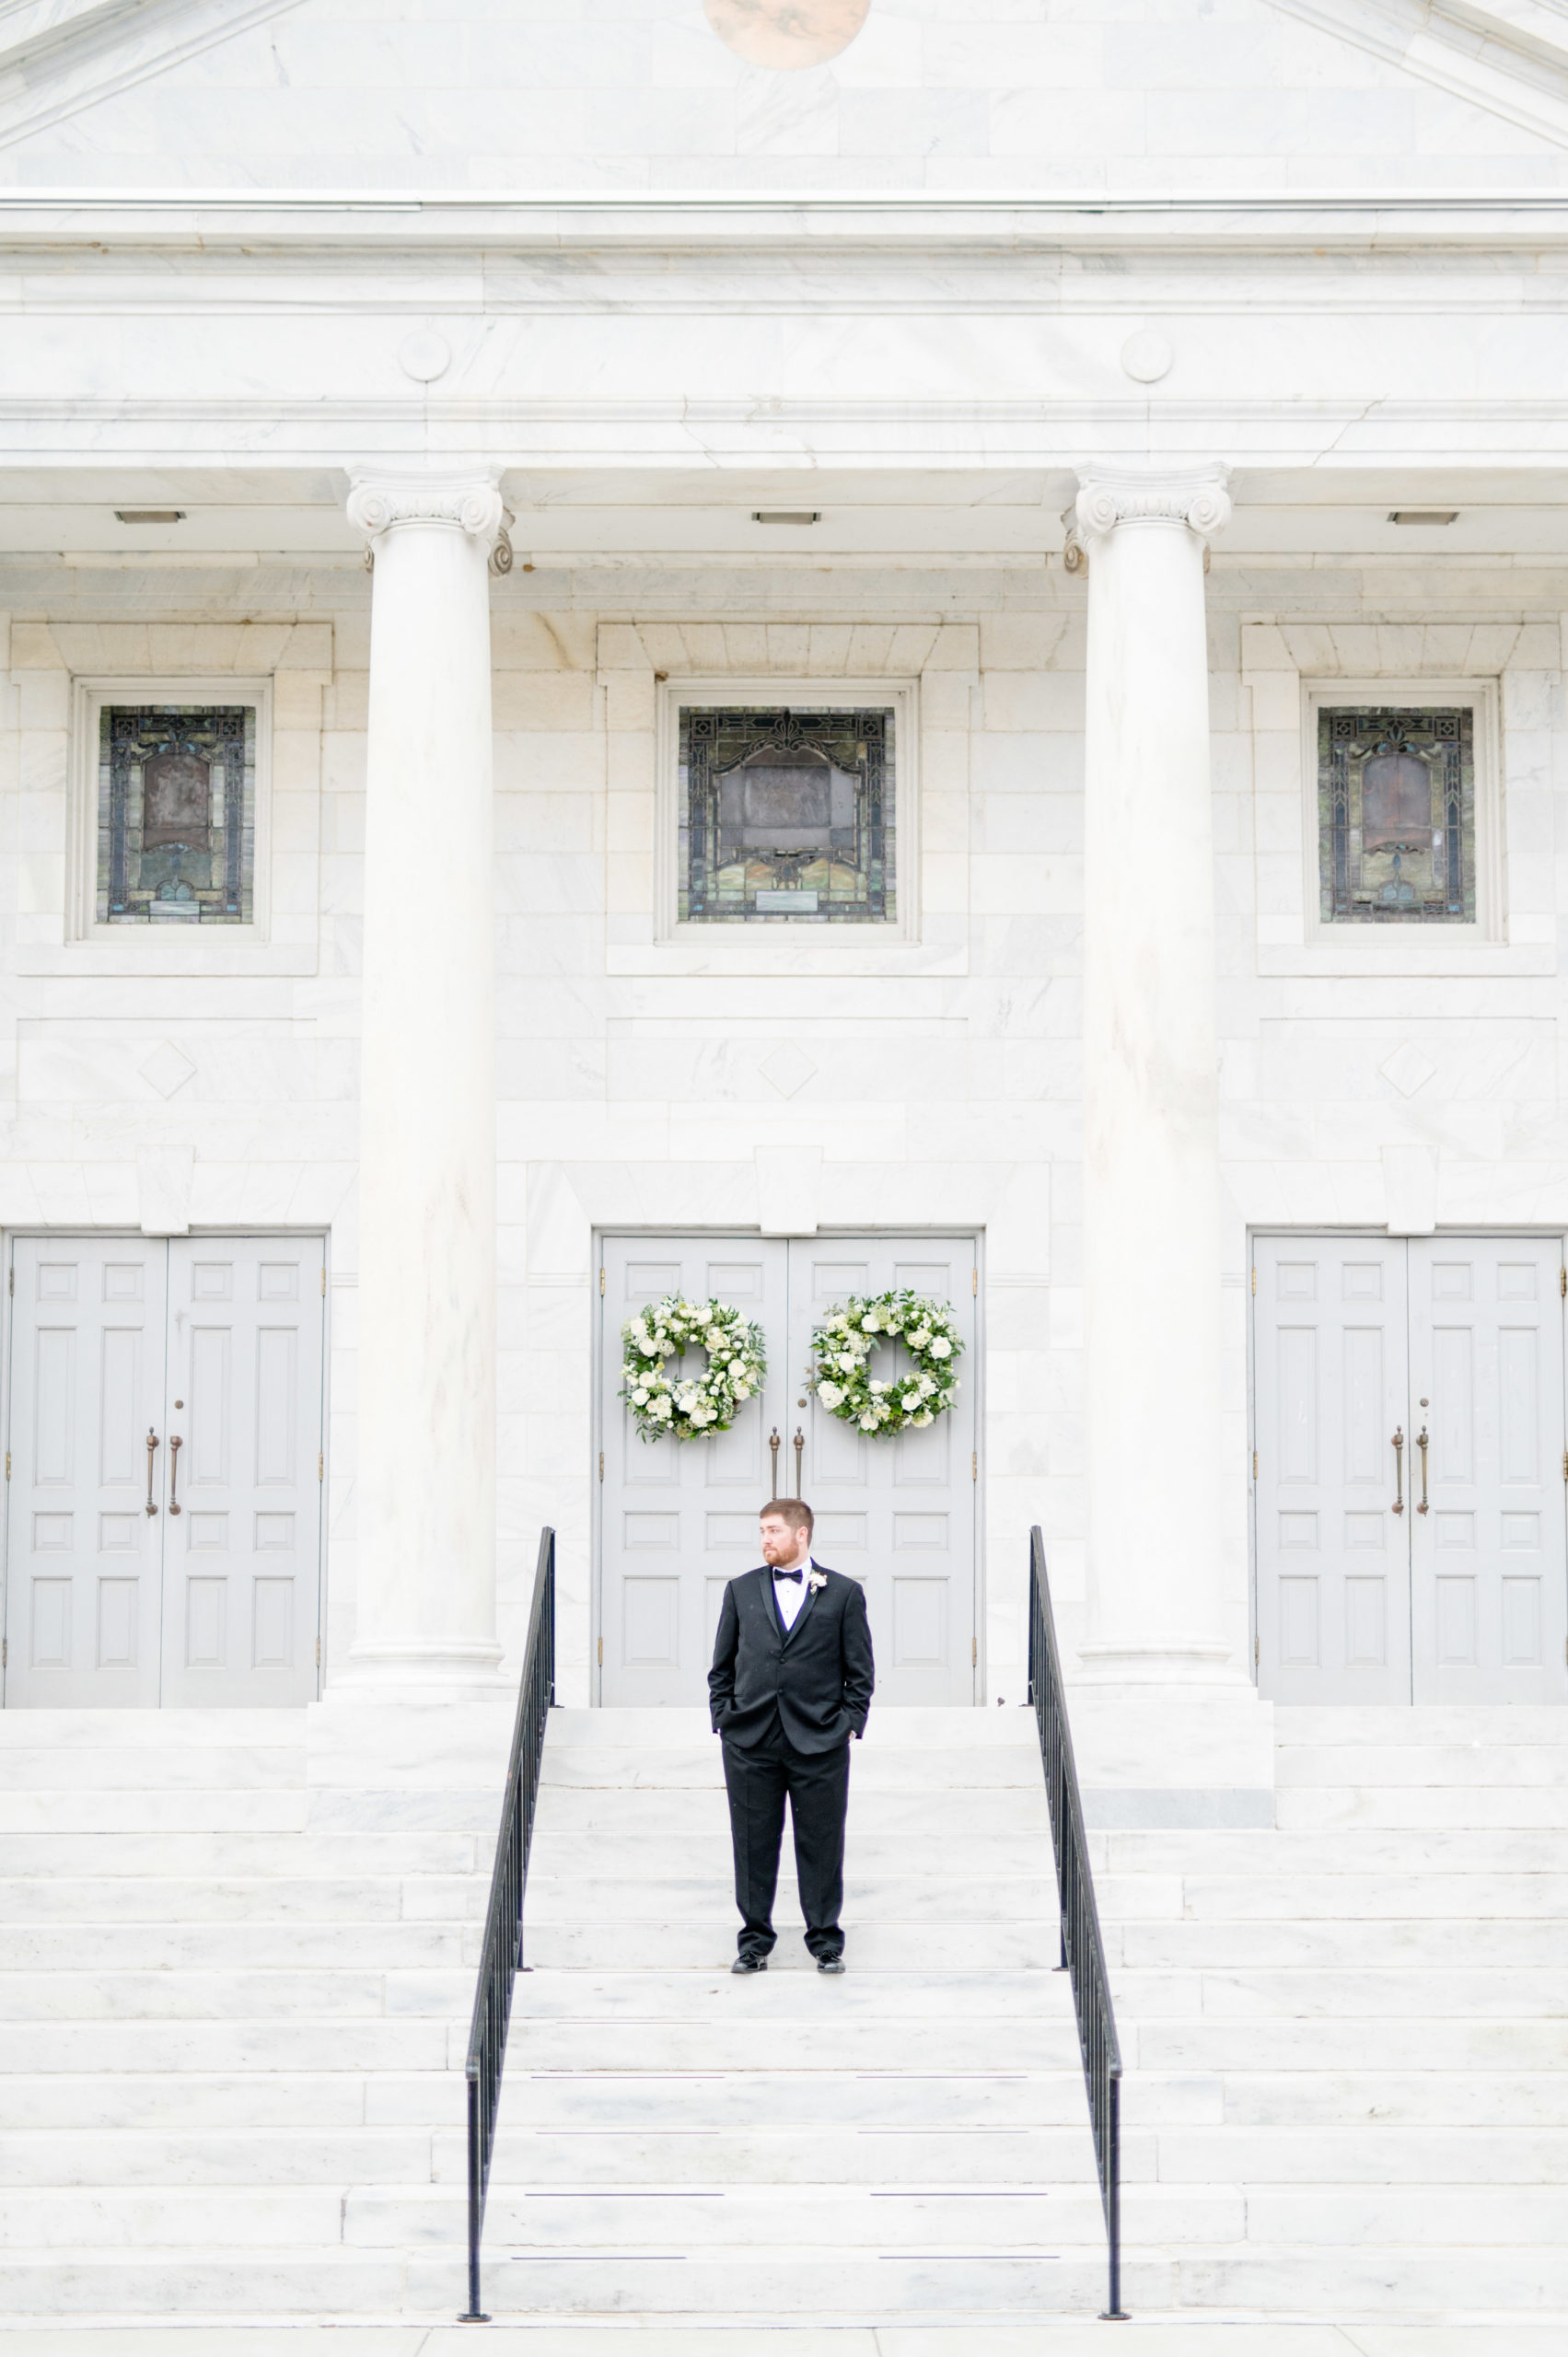 Groom stands on marble steps and looks over shoulder.